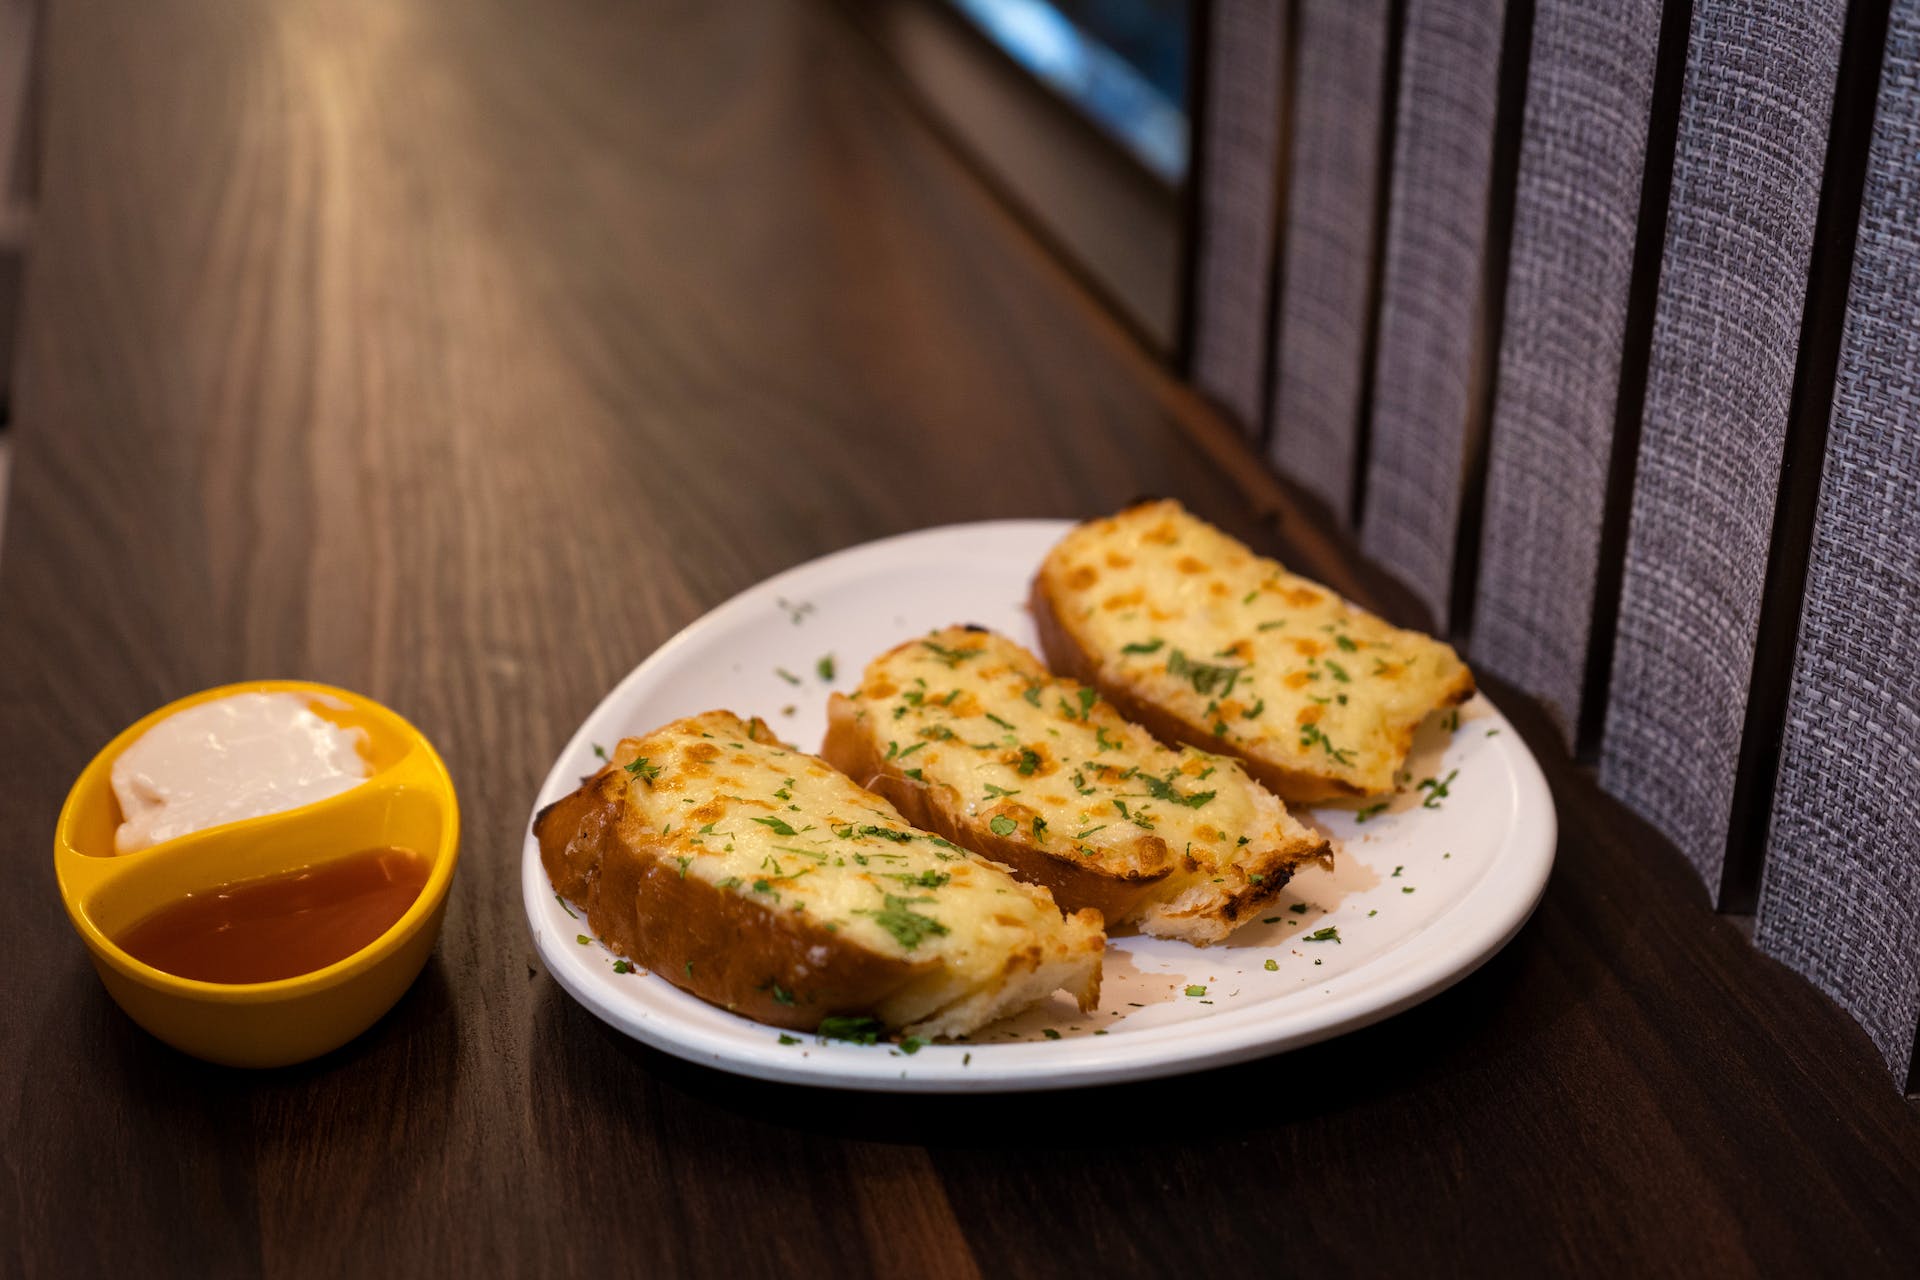 Cheesy garlic bread on a plate. | Source: Pexels